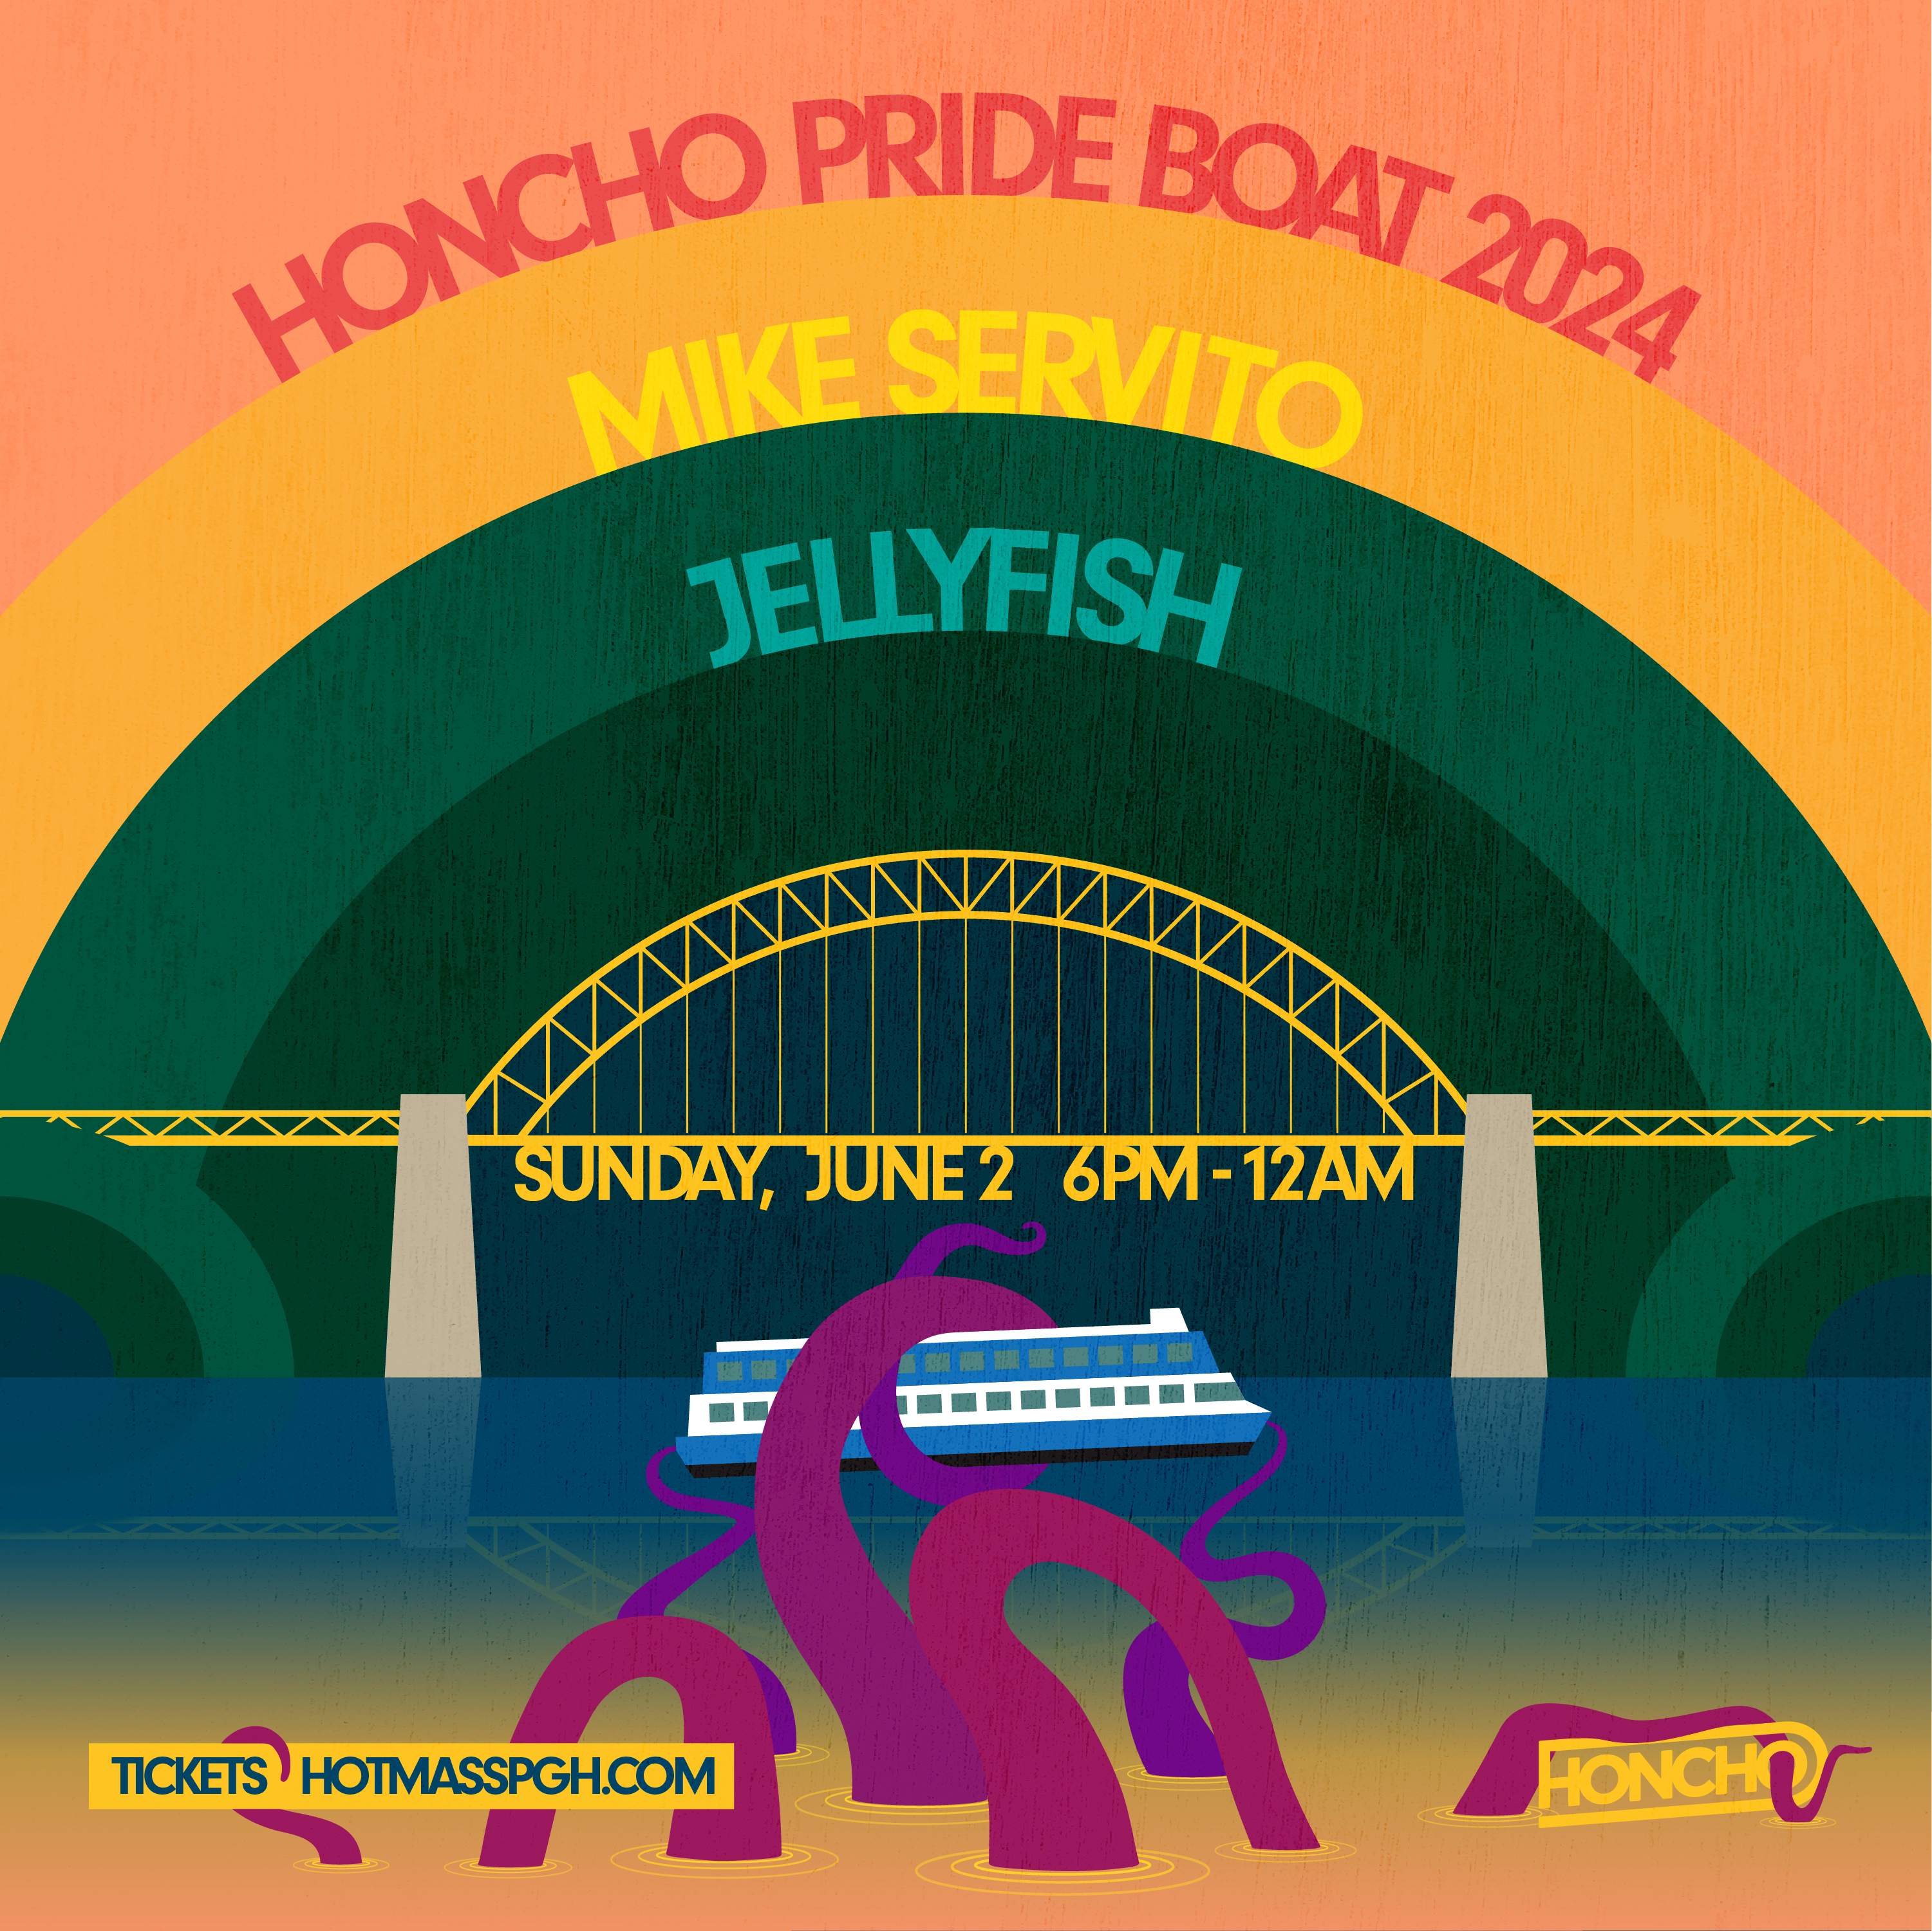 Honcho Pride Boat with Mike Servito & Jellyfish - フライヤー表